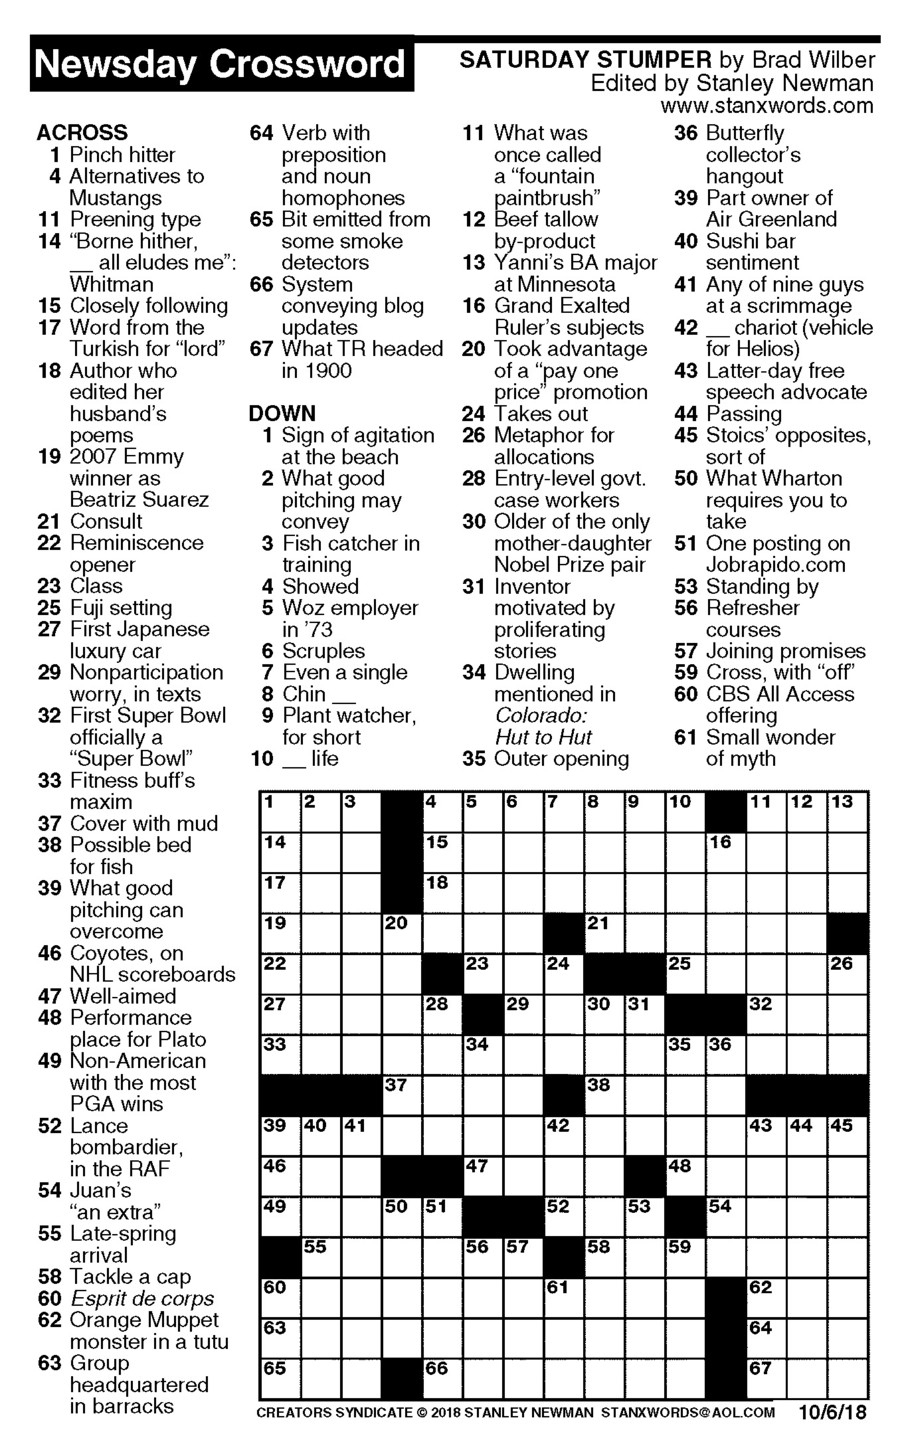 Newsday Crossword Puzzle For Oct 06, 2018,stanley Newman - Printable Crossword Puzzle 2018